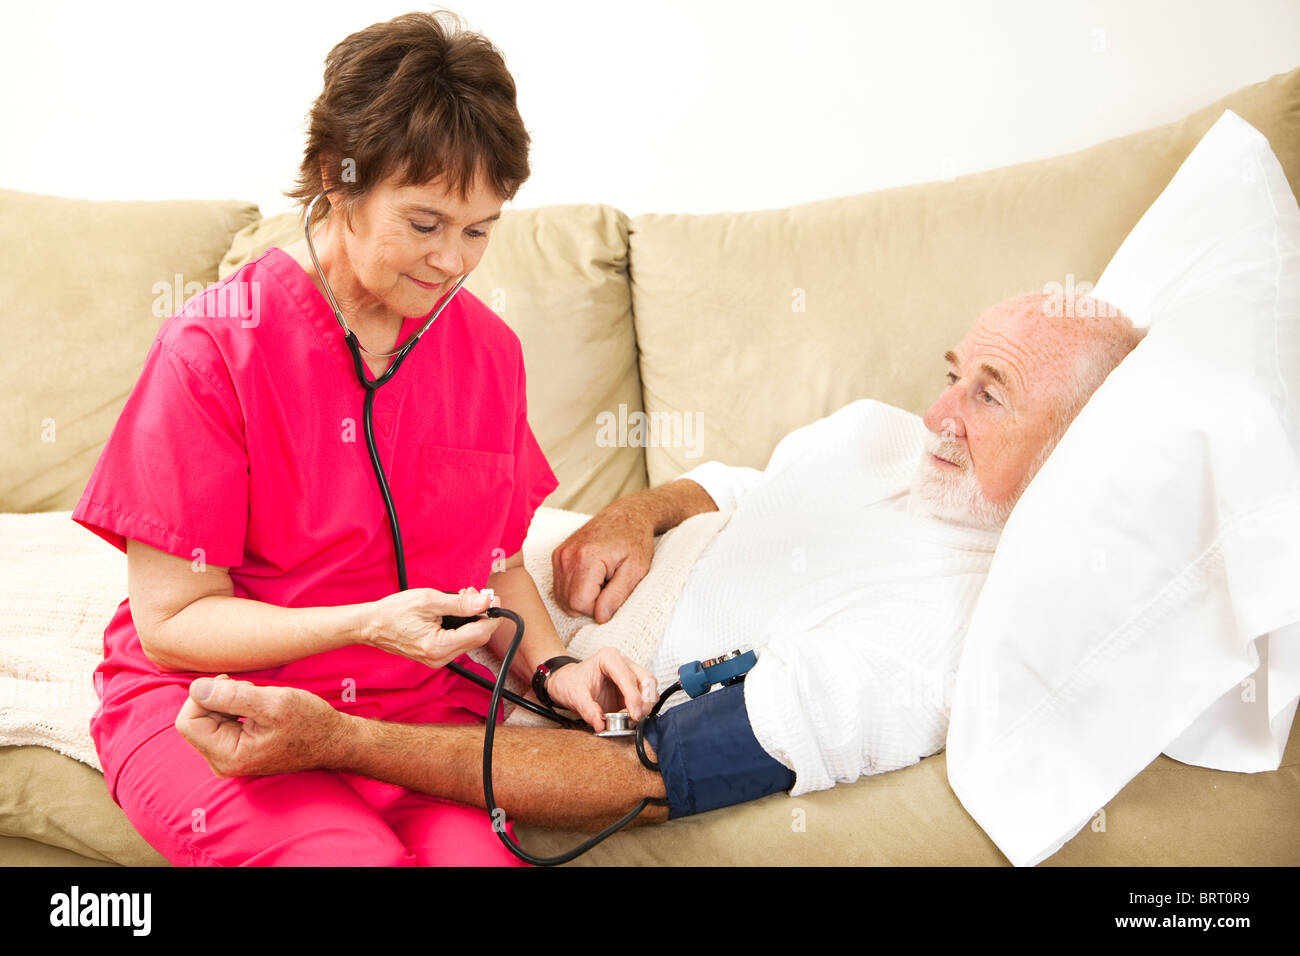 Friendly home health nurse taking the blood pressure of an elderly patient.  Stock Photo